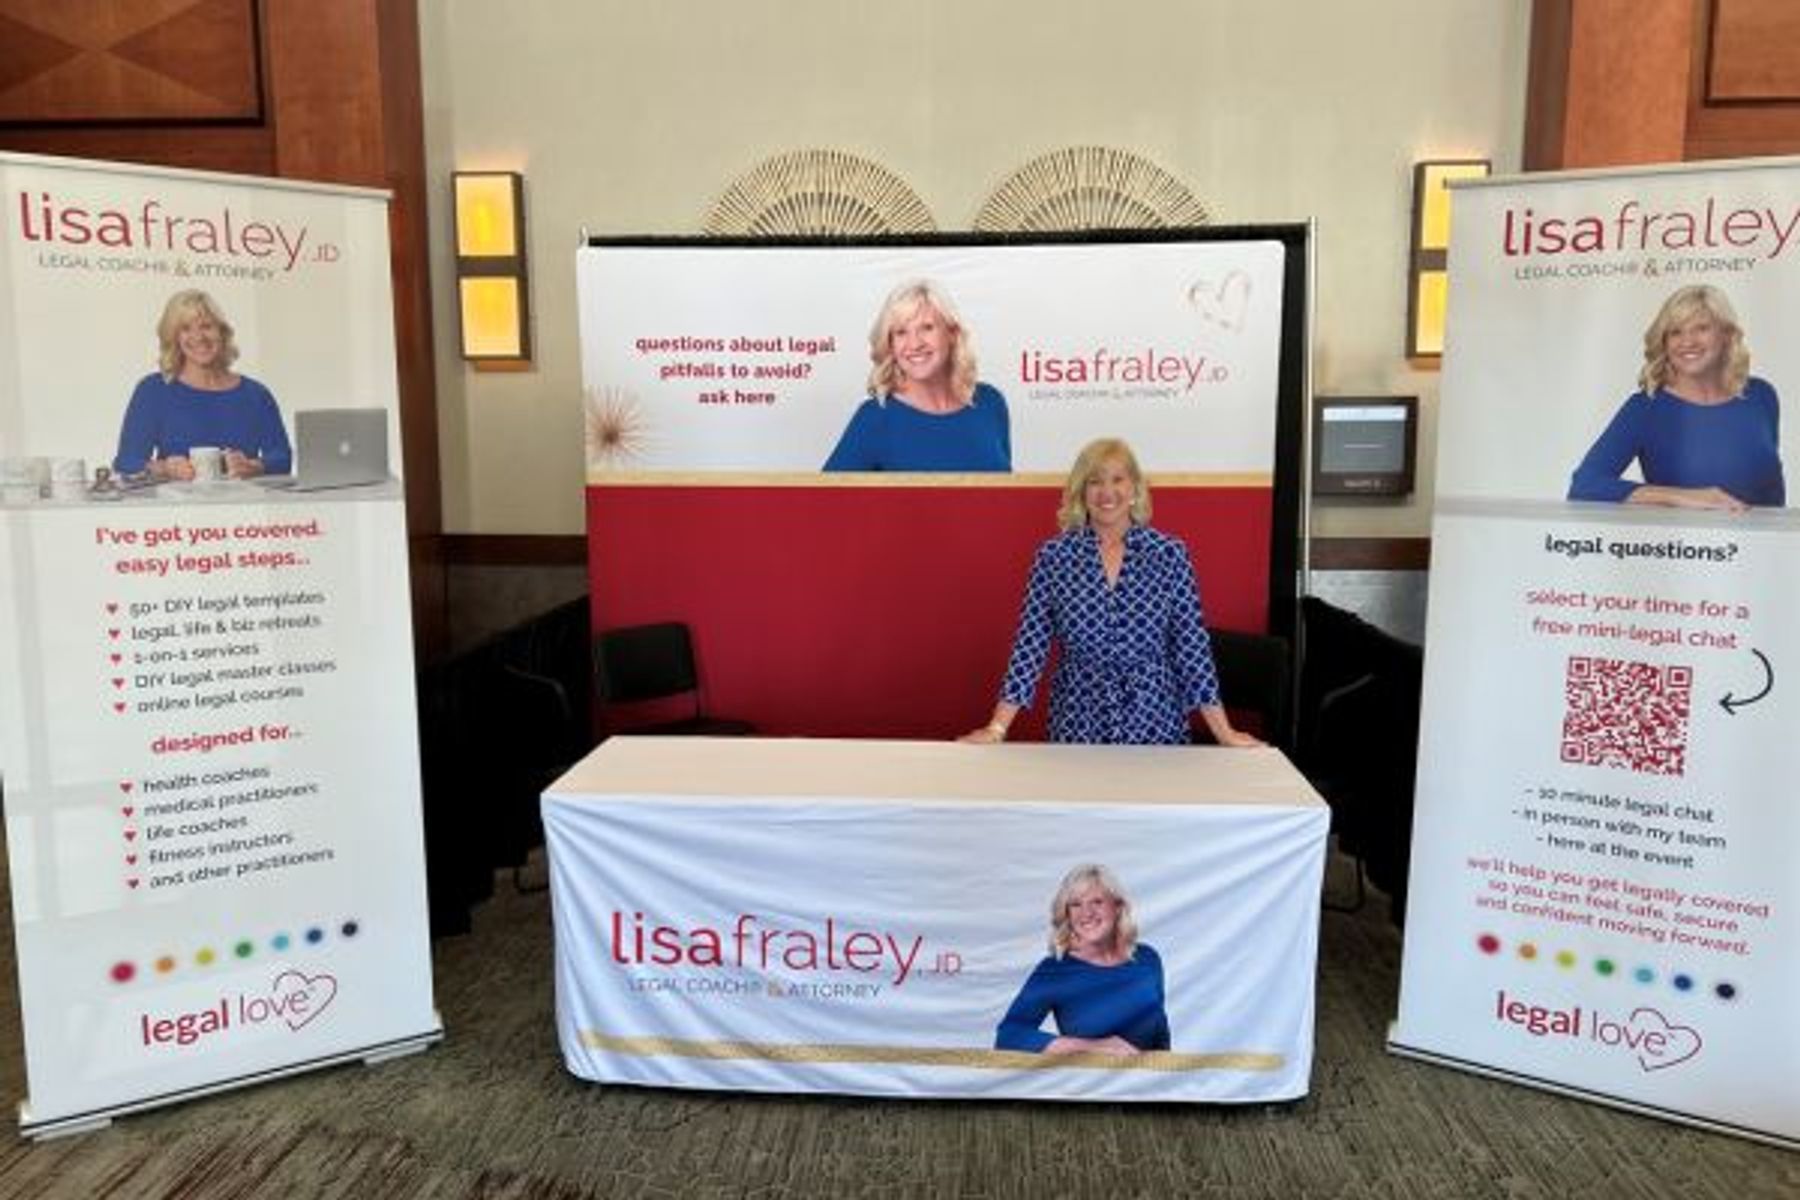 Lisa Fraley's booth using branding and print designs from The Digital Frontier